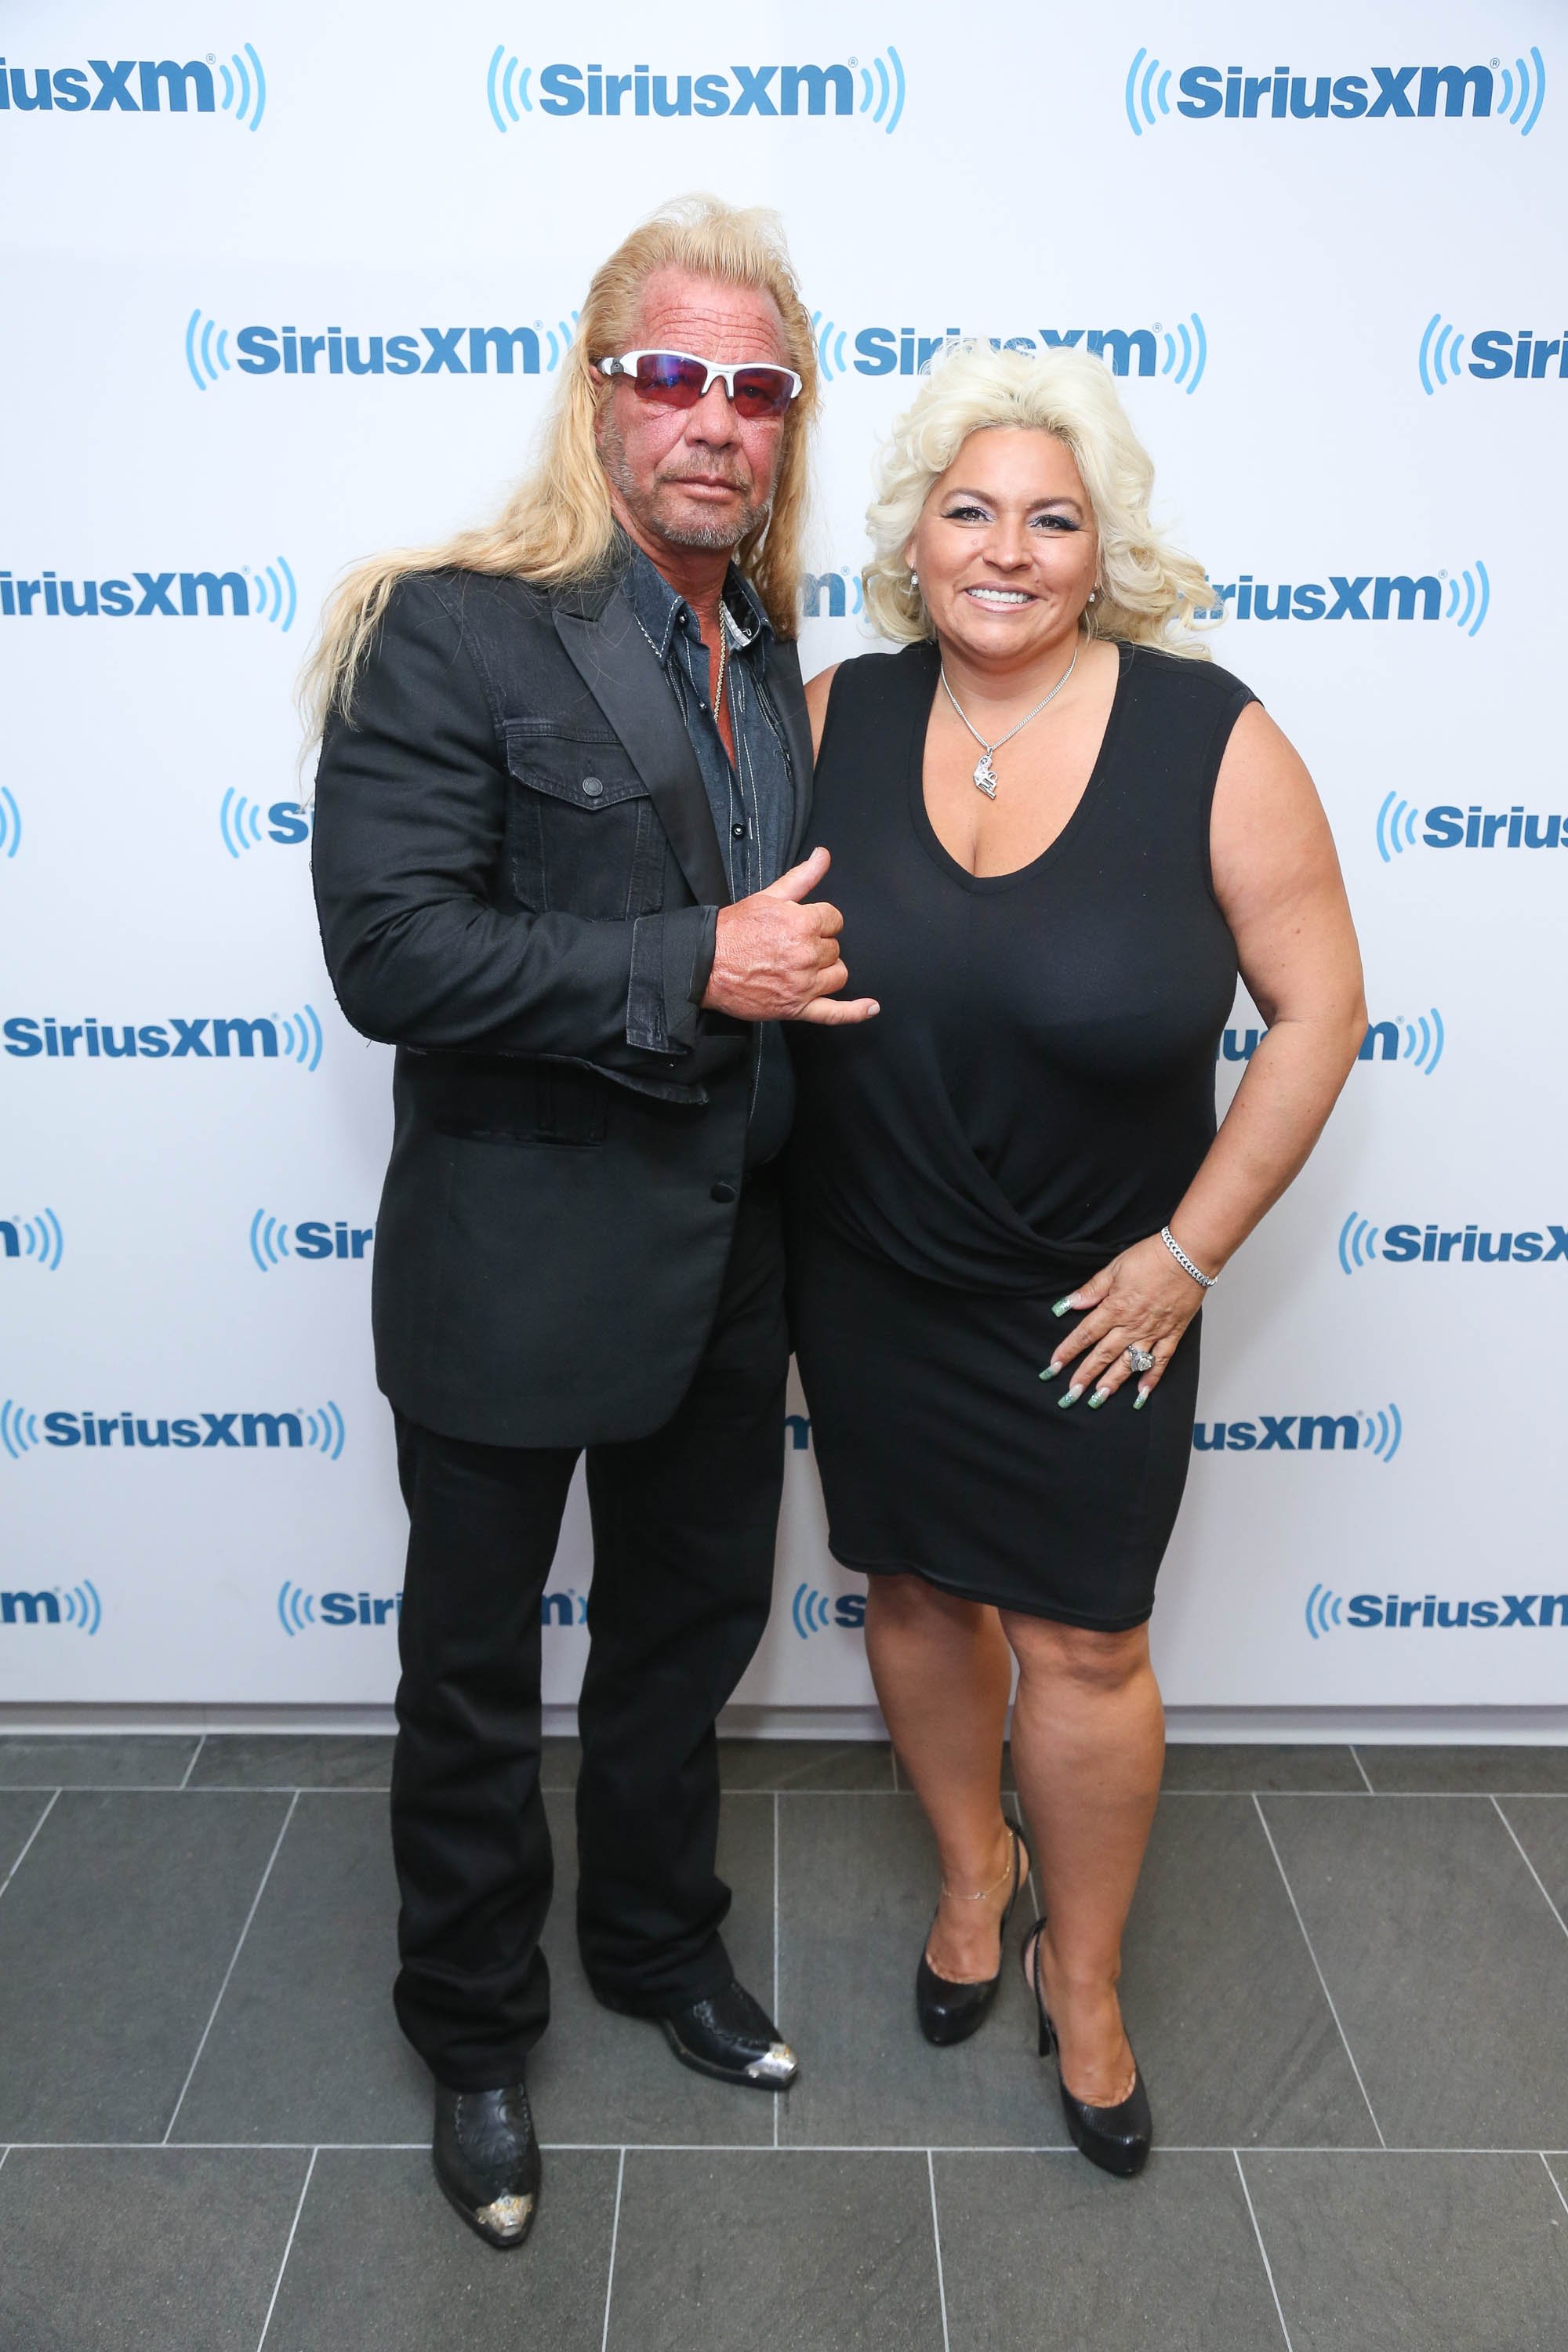 Dog the Bounty Hunter, Duane Chapman and wife Beth Chapman visit at SiriusXM Studios on June 9, 2014, in New York City. | Source: Getty Images.